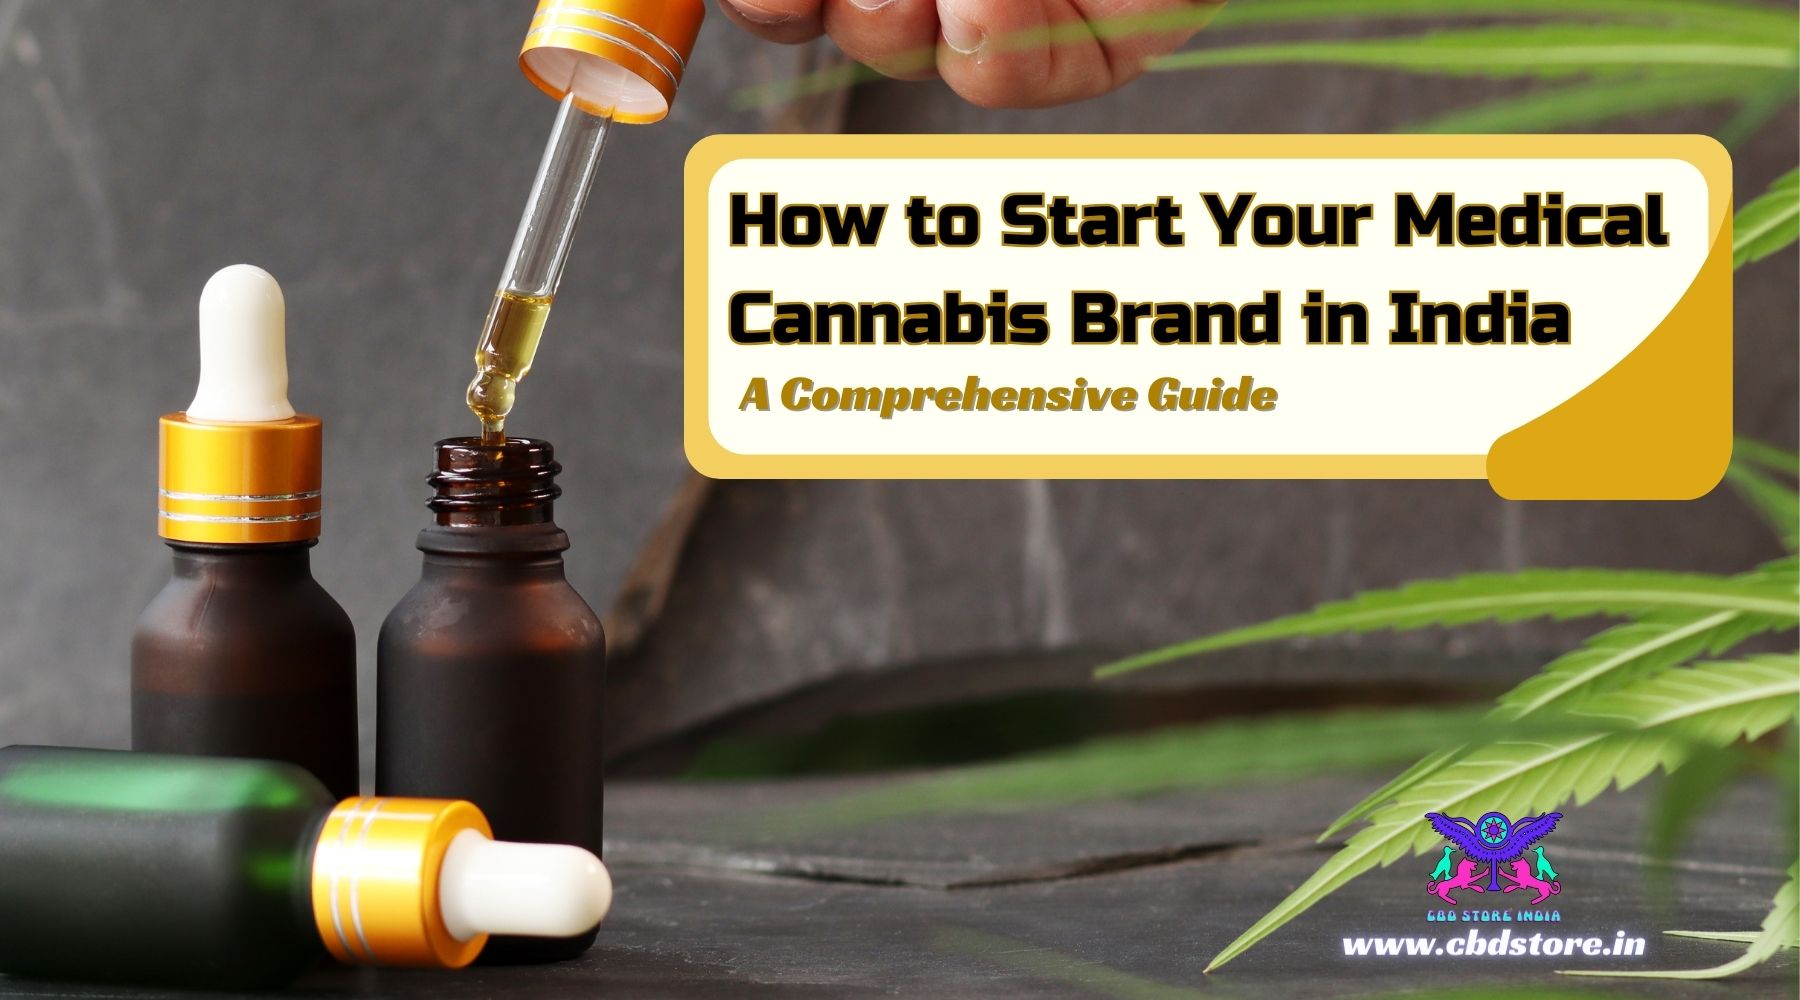 How to Start Your Medical Cannabis Brand in India: A Comprehensive Guide - CBD Store India